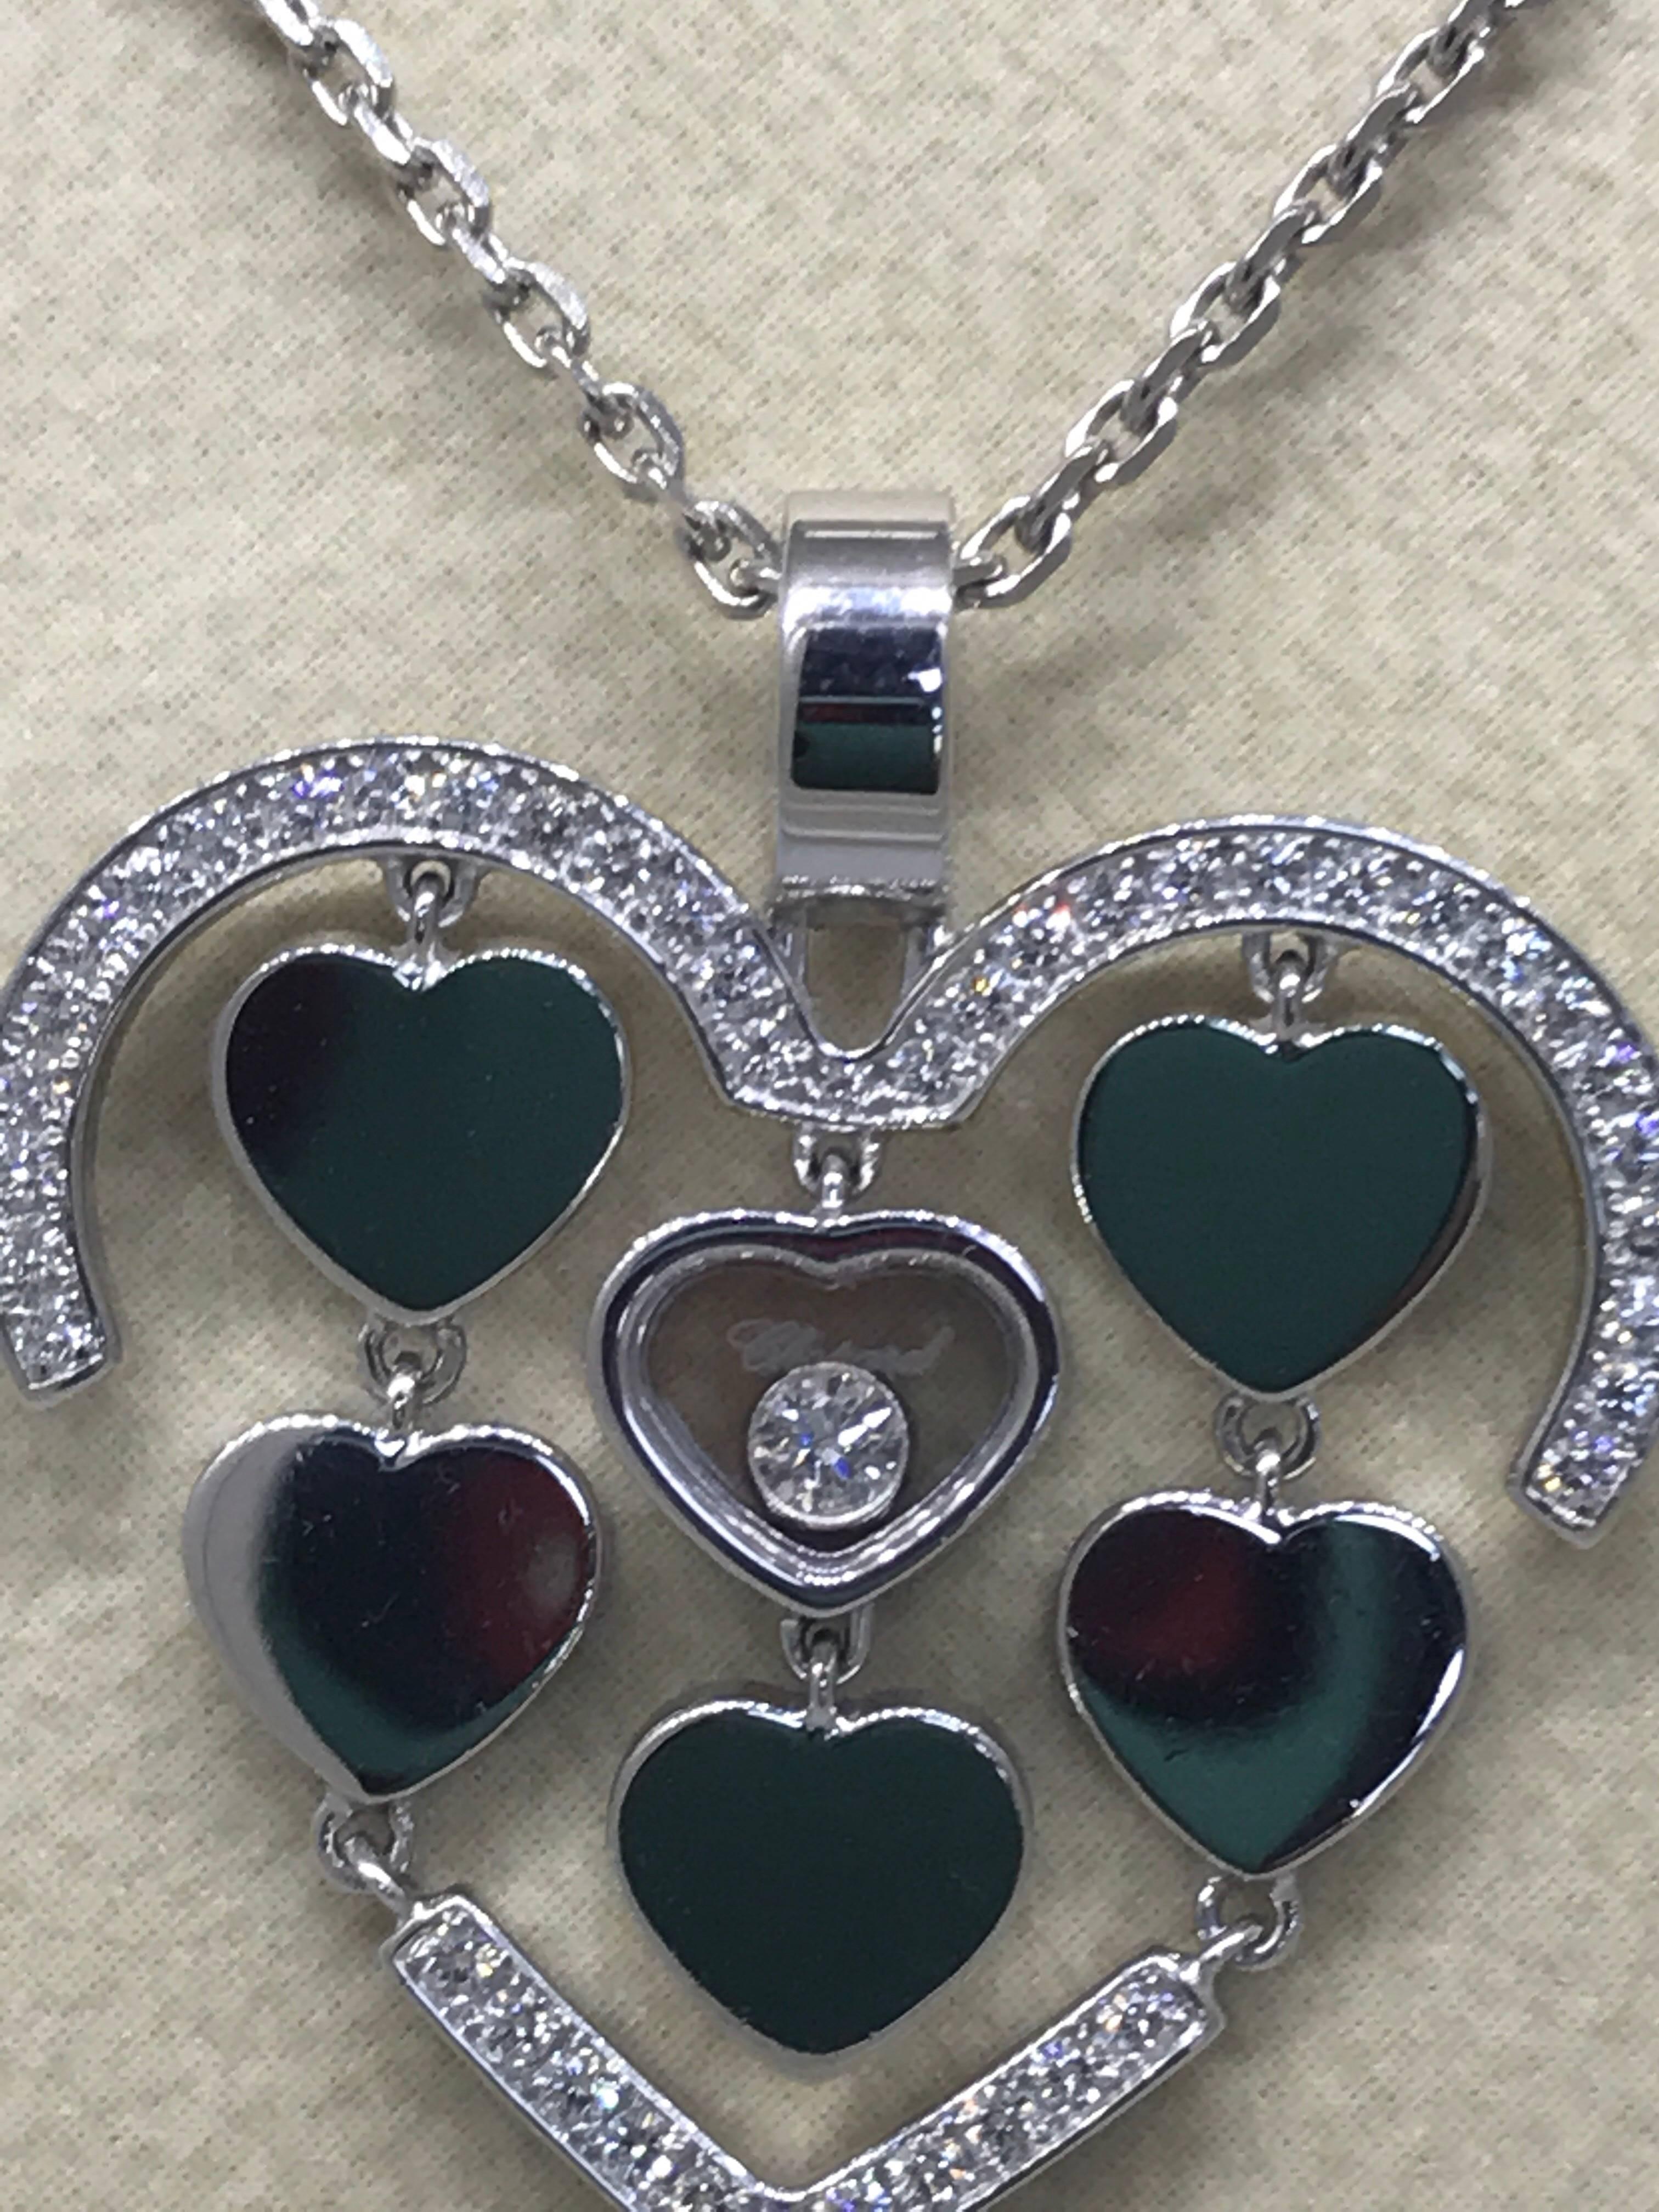 Chopard Amore Hearts 18 Karat White Gold and Diamond Pendant / Necklace 79/7219 In New Condition For Sale In New York, NY